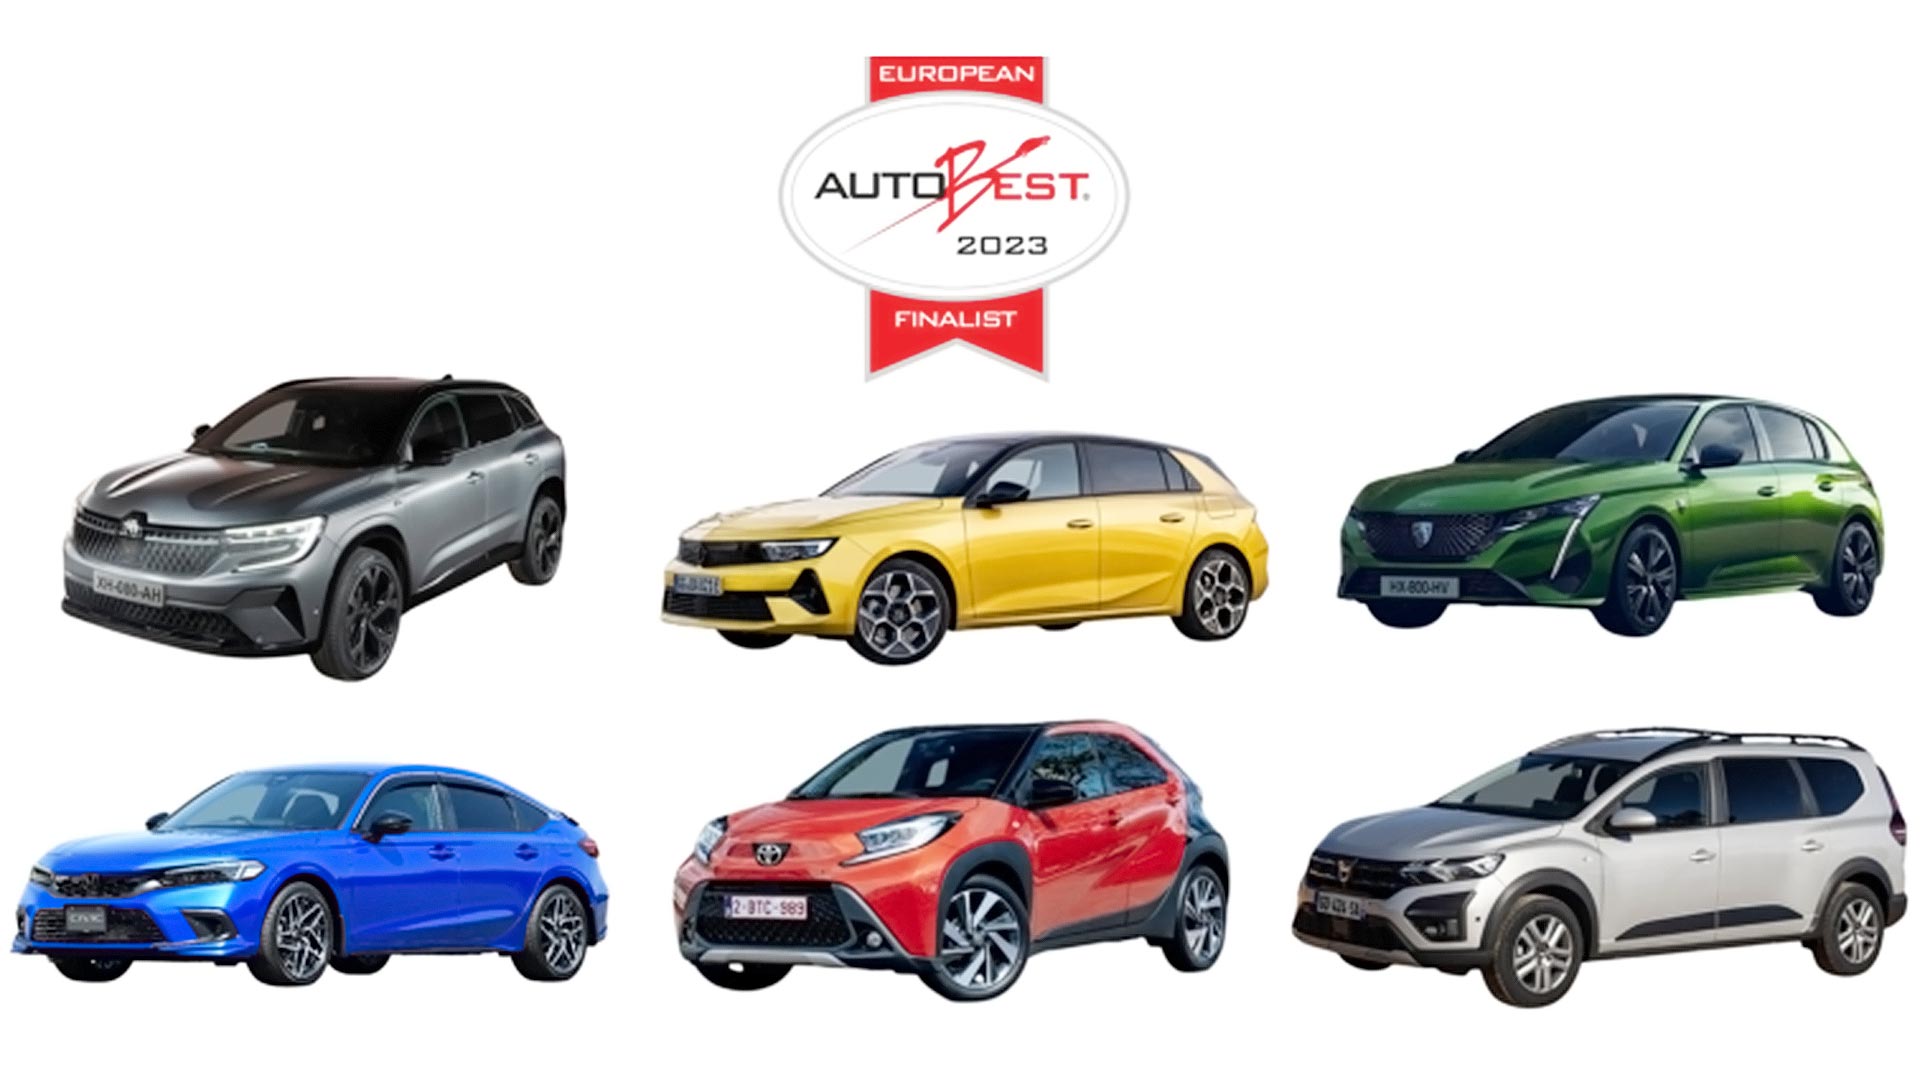 AUTOBEST 2023 Best Buy Car finalists revealed - Motoring Research